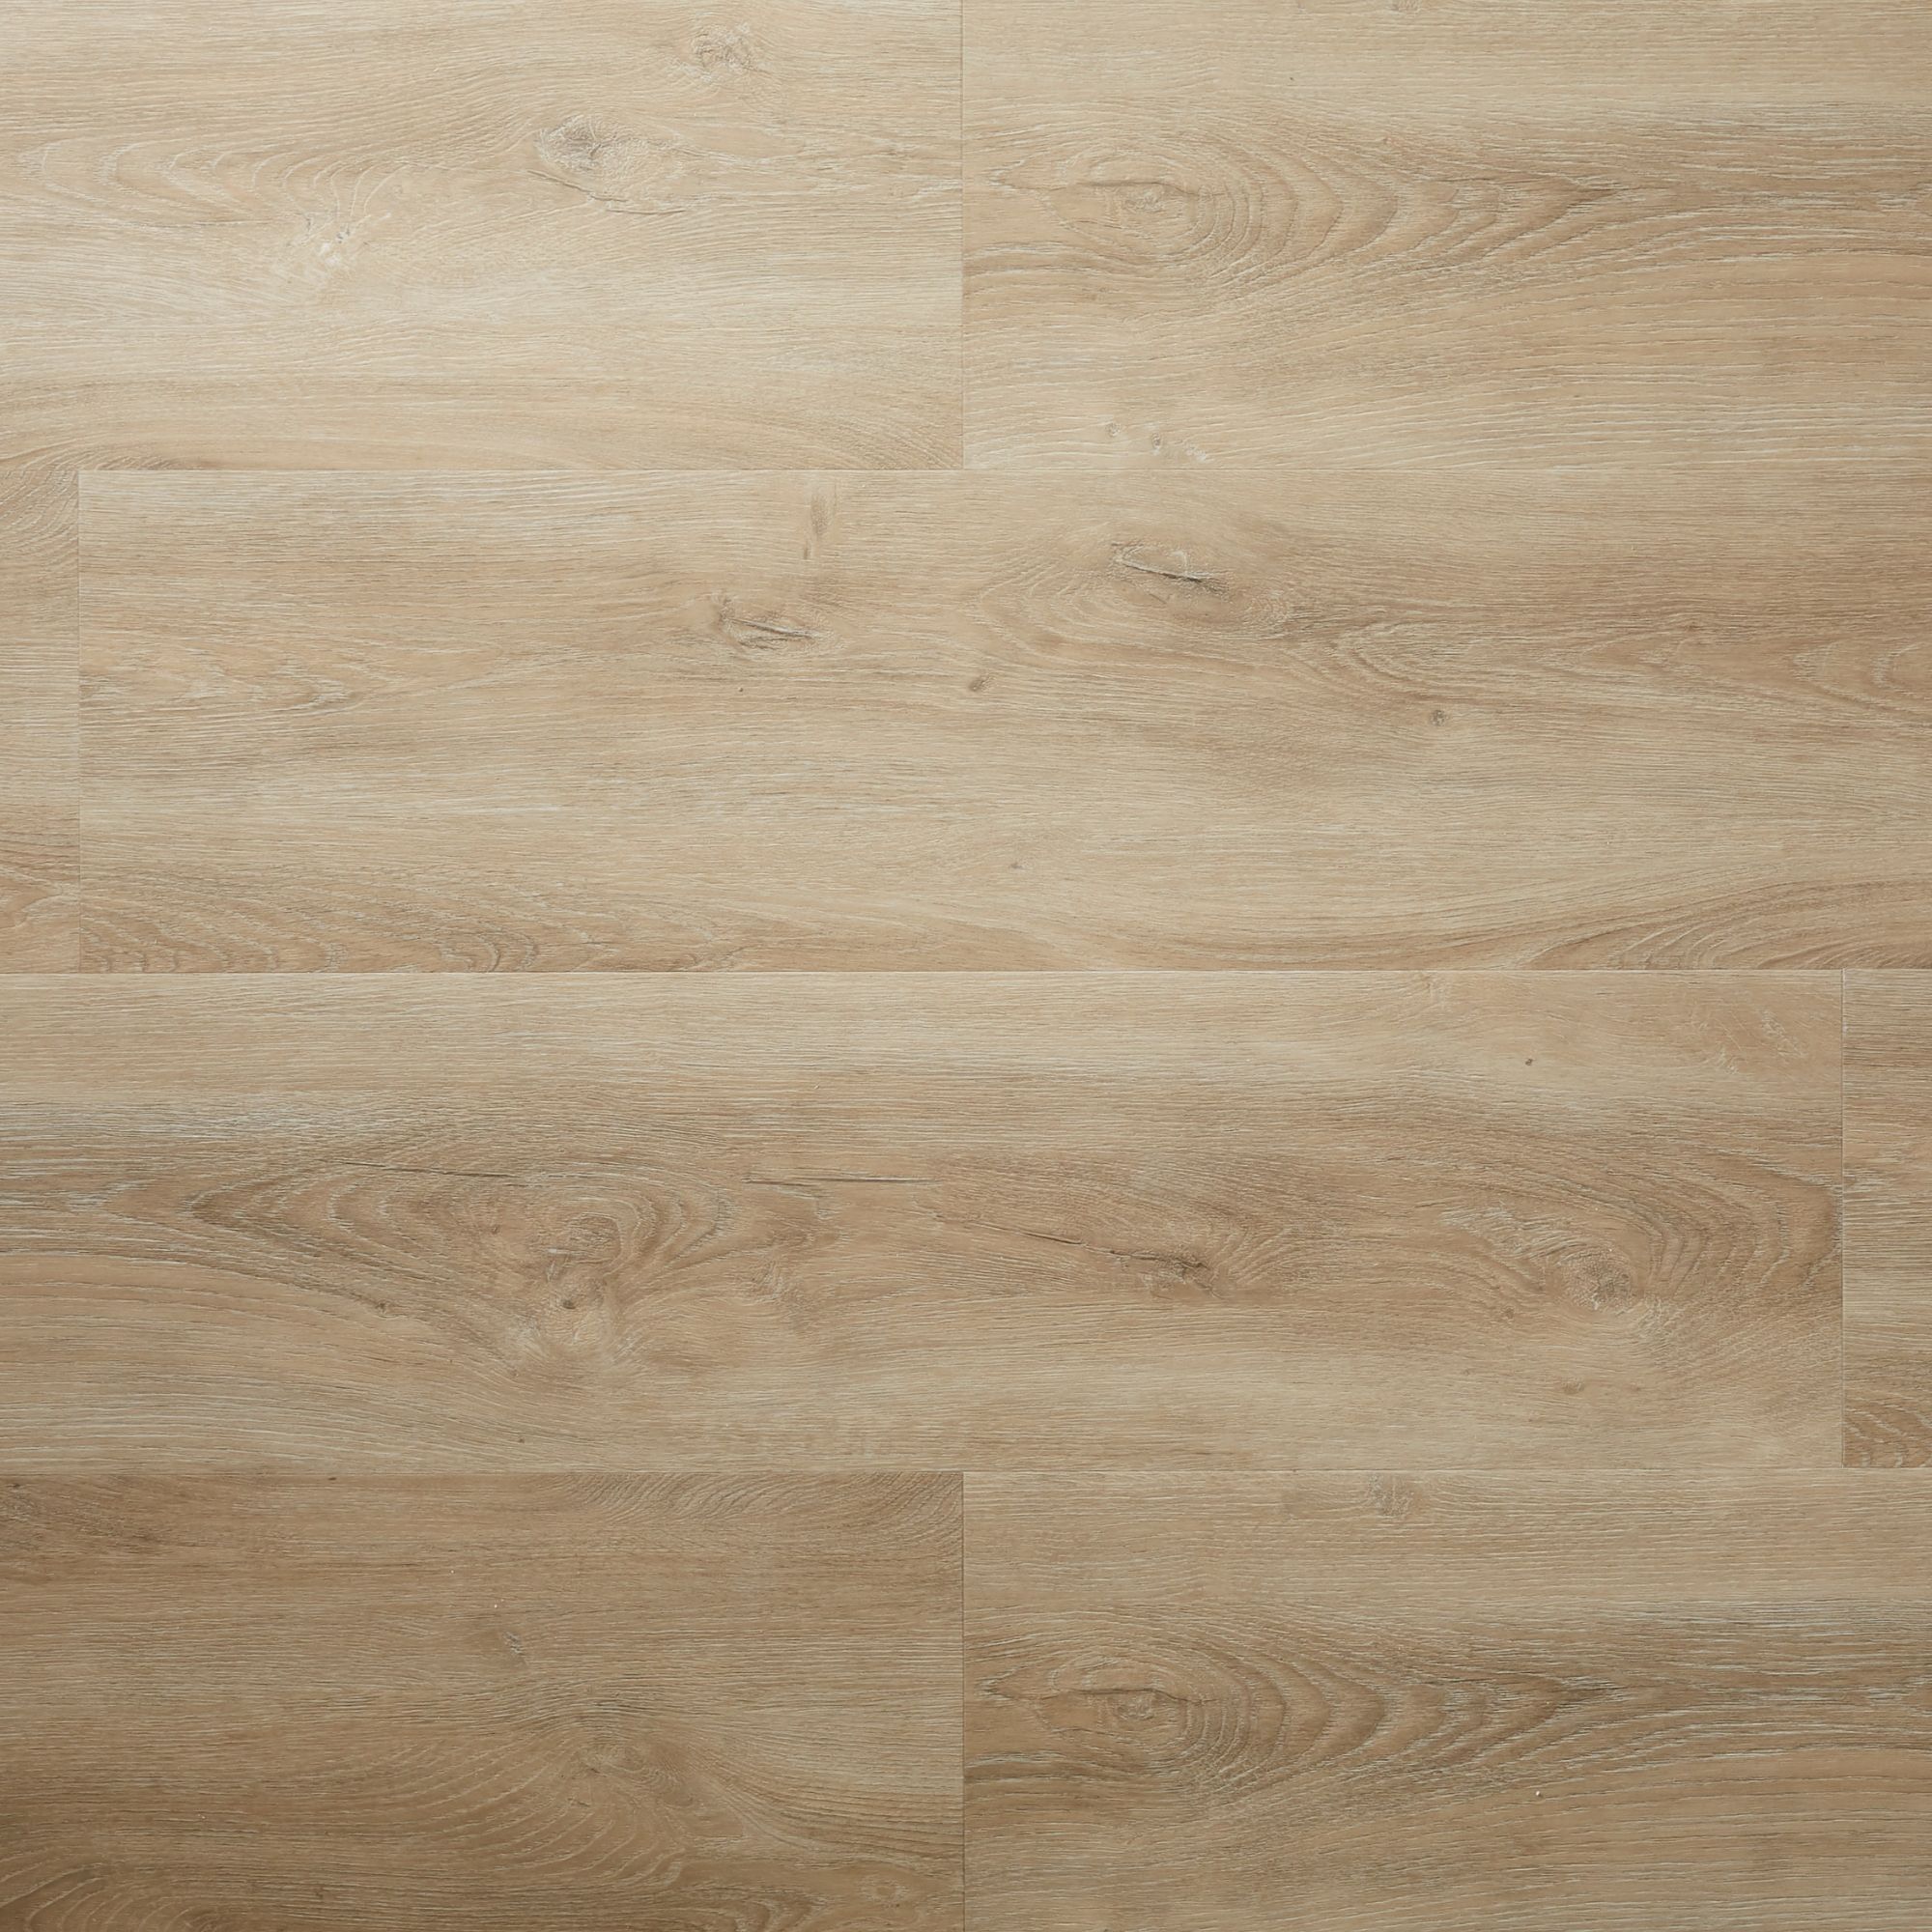 GoodHome Jazy Natural Wood effect Vinyl tile, 2.24m² Pack of 8